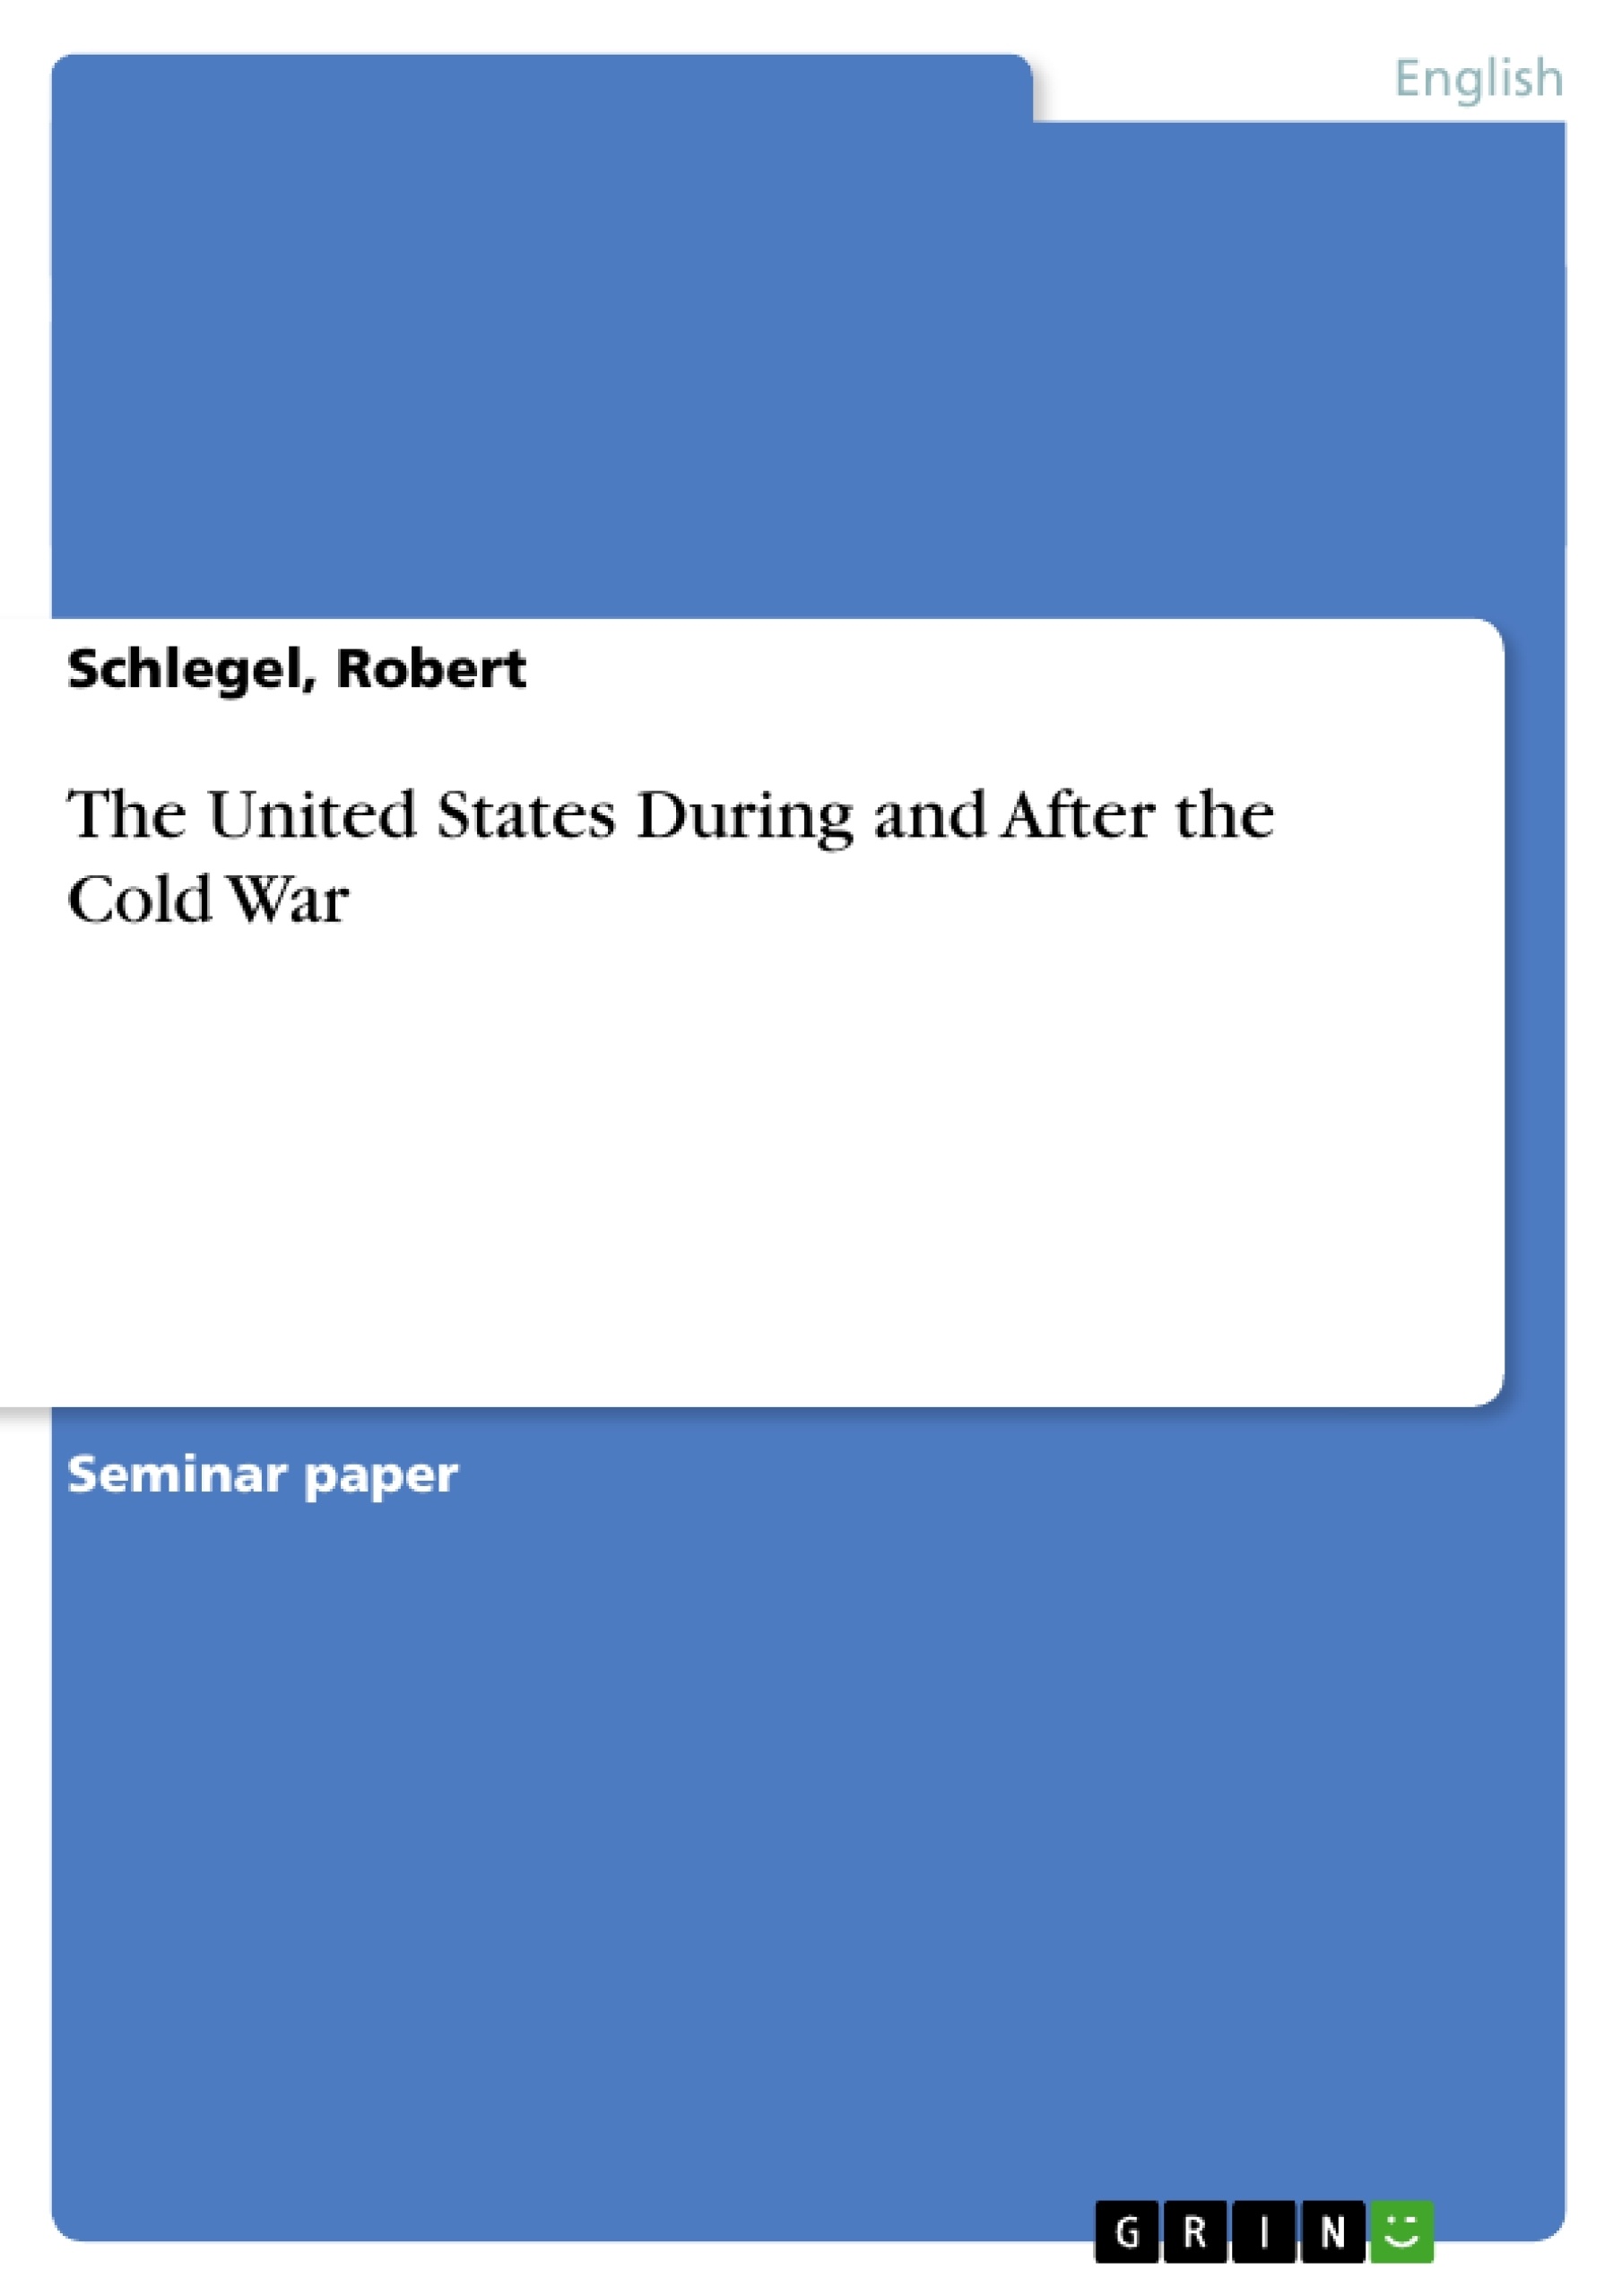 Título: The United States During and After the Cold War